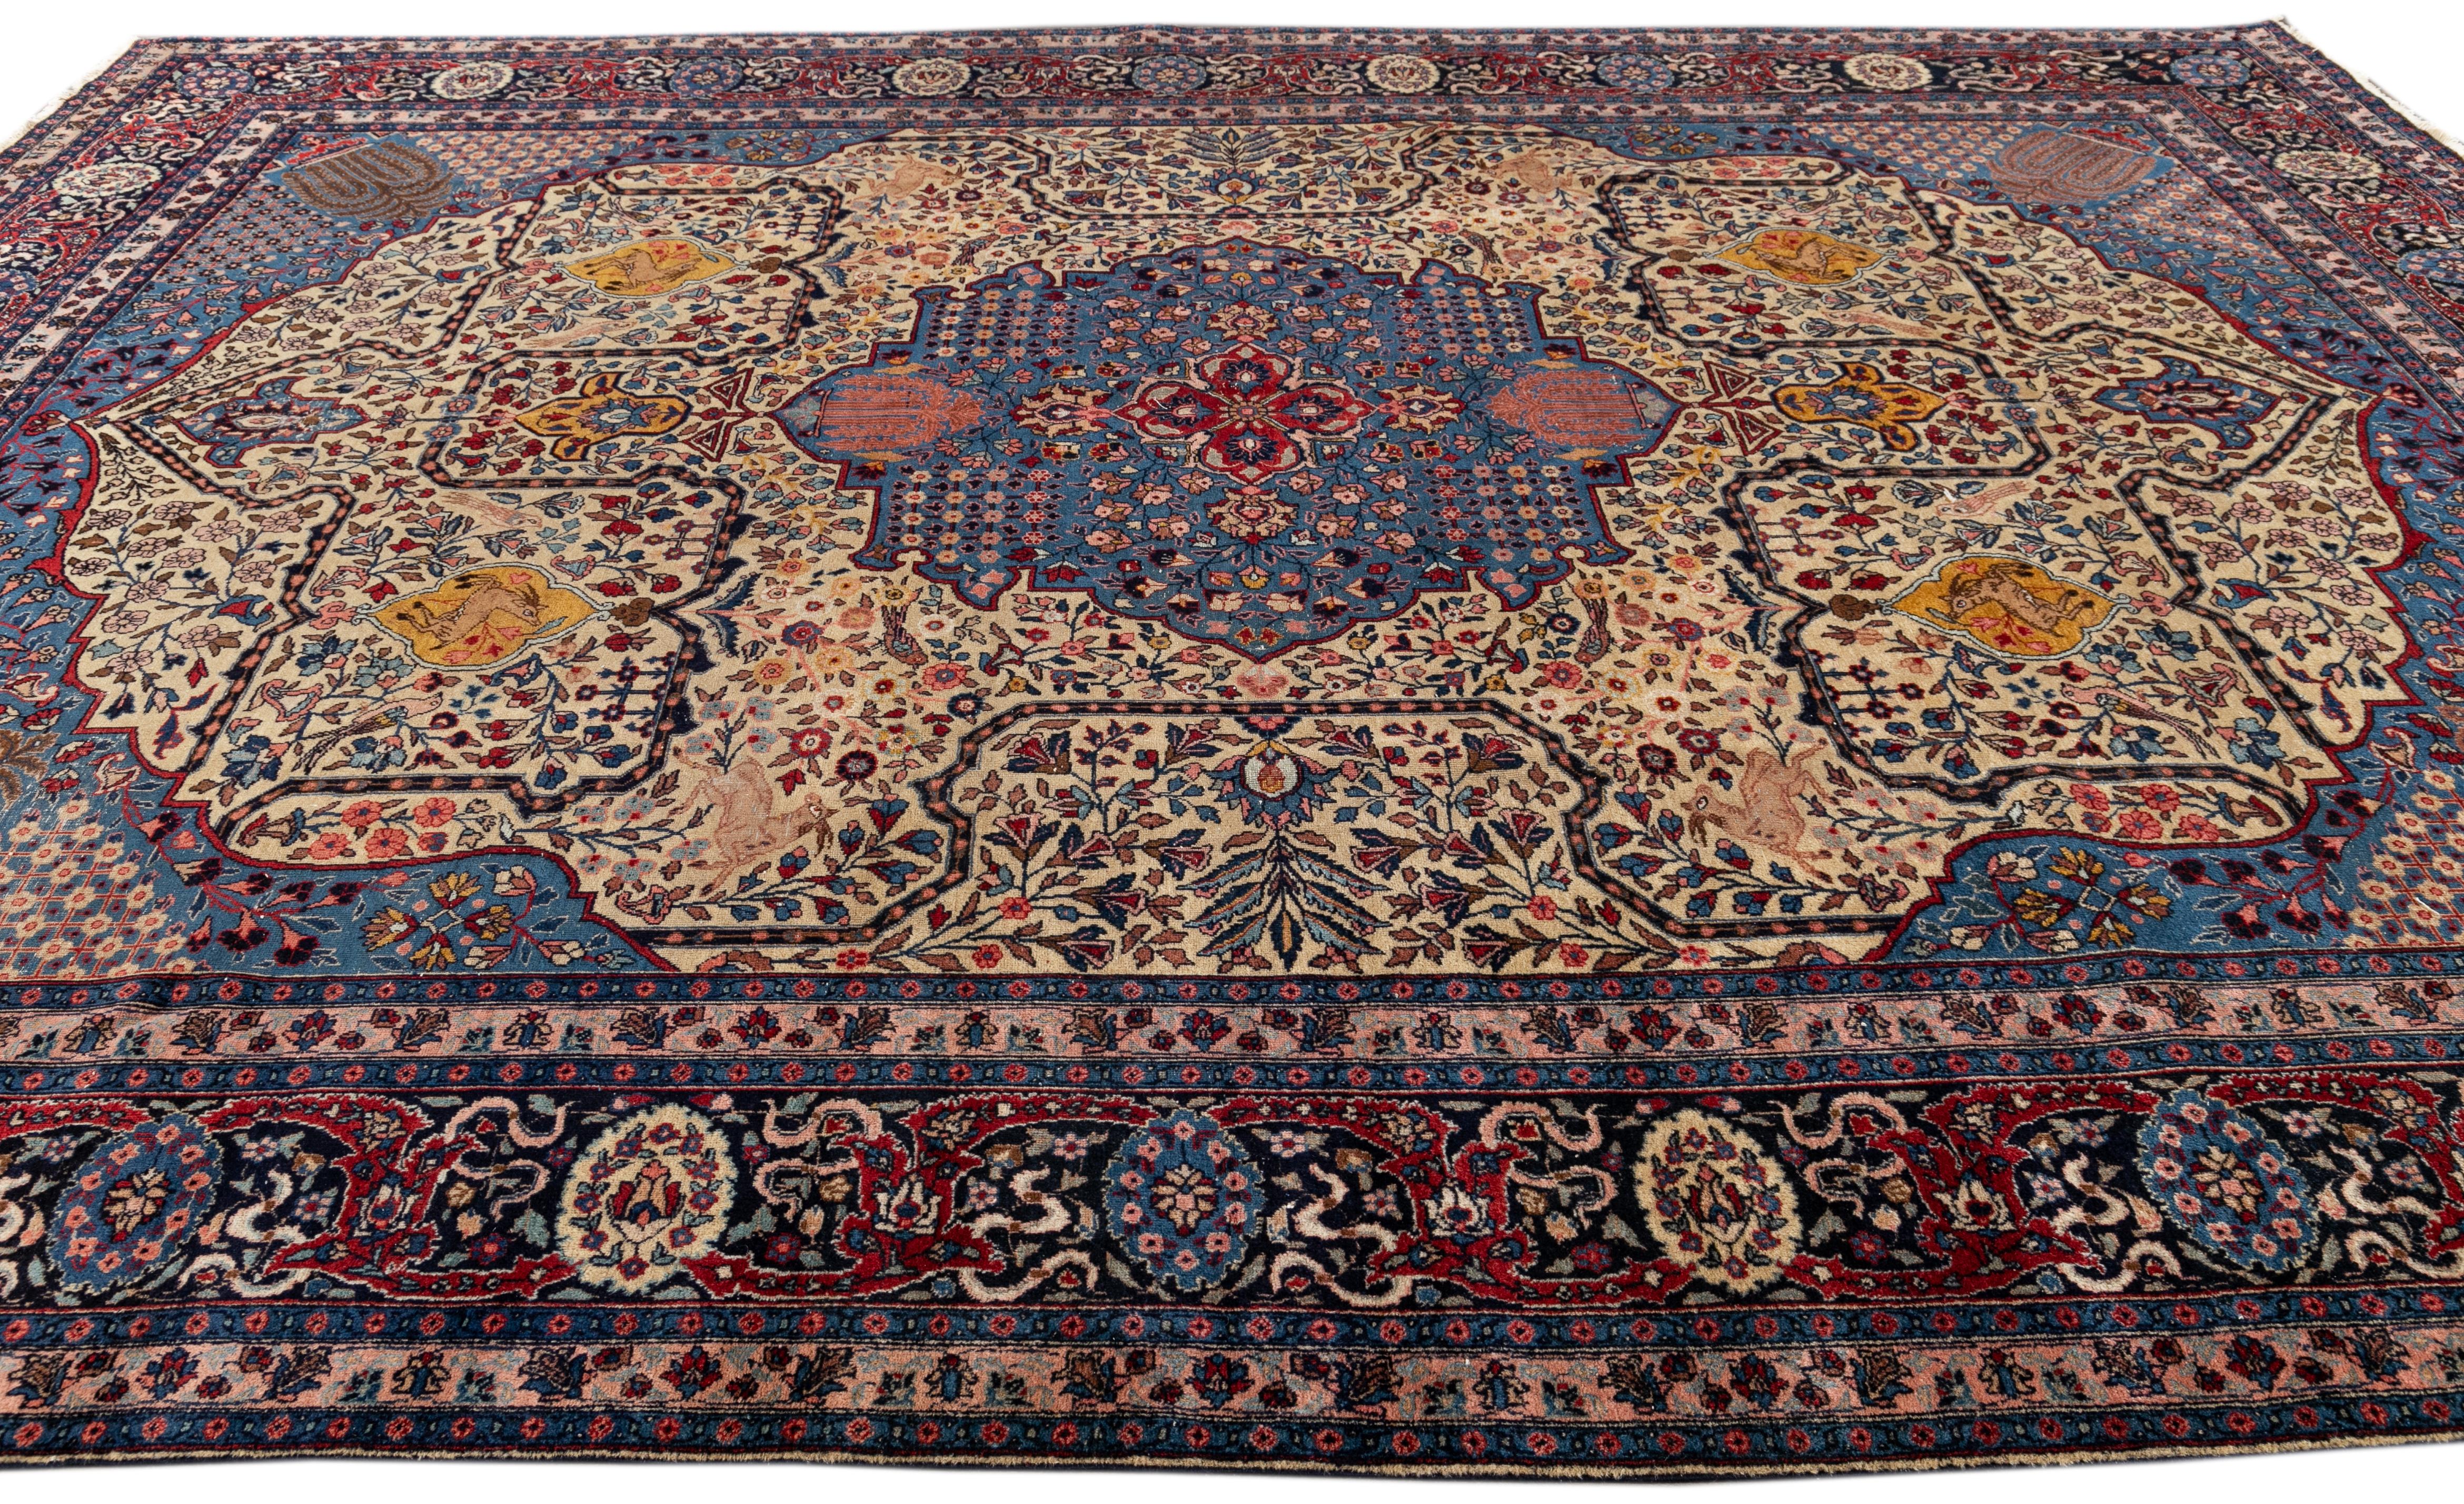 Beautiful Persian Isfahan hand-knotted natural wool rug with a tan color field. This piece has a designed frame with multicolor accents in an all-over medallion floral design.

This rug measures: 11'7